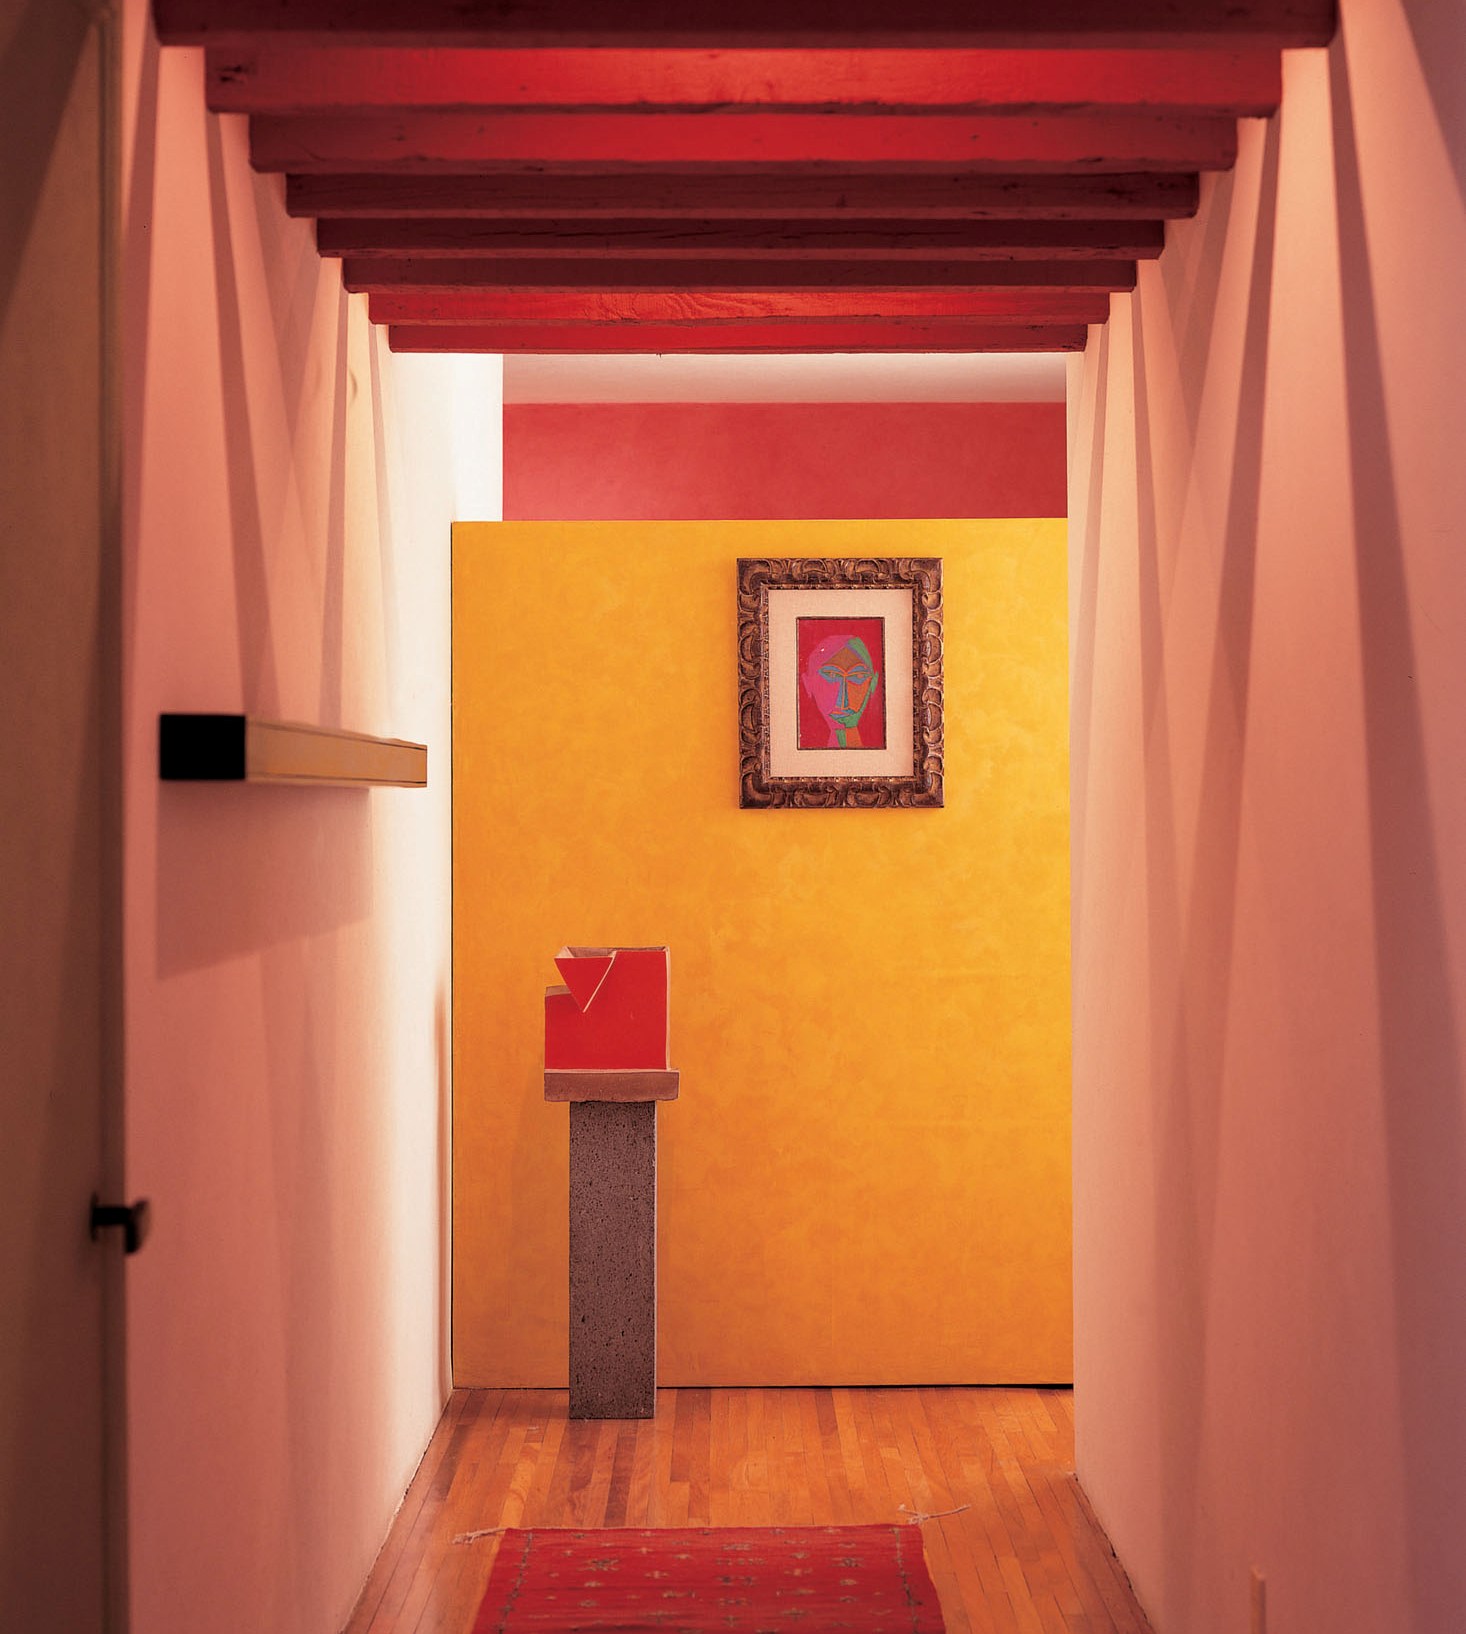 A cheerful Mexican color palette and strategic use of ceiling beams gave better proportion to a long, narrow corridor.